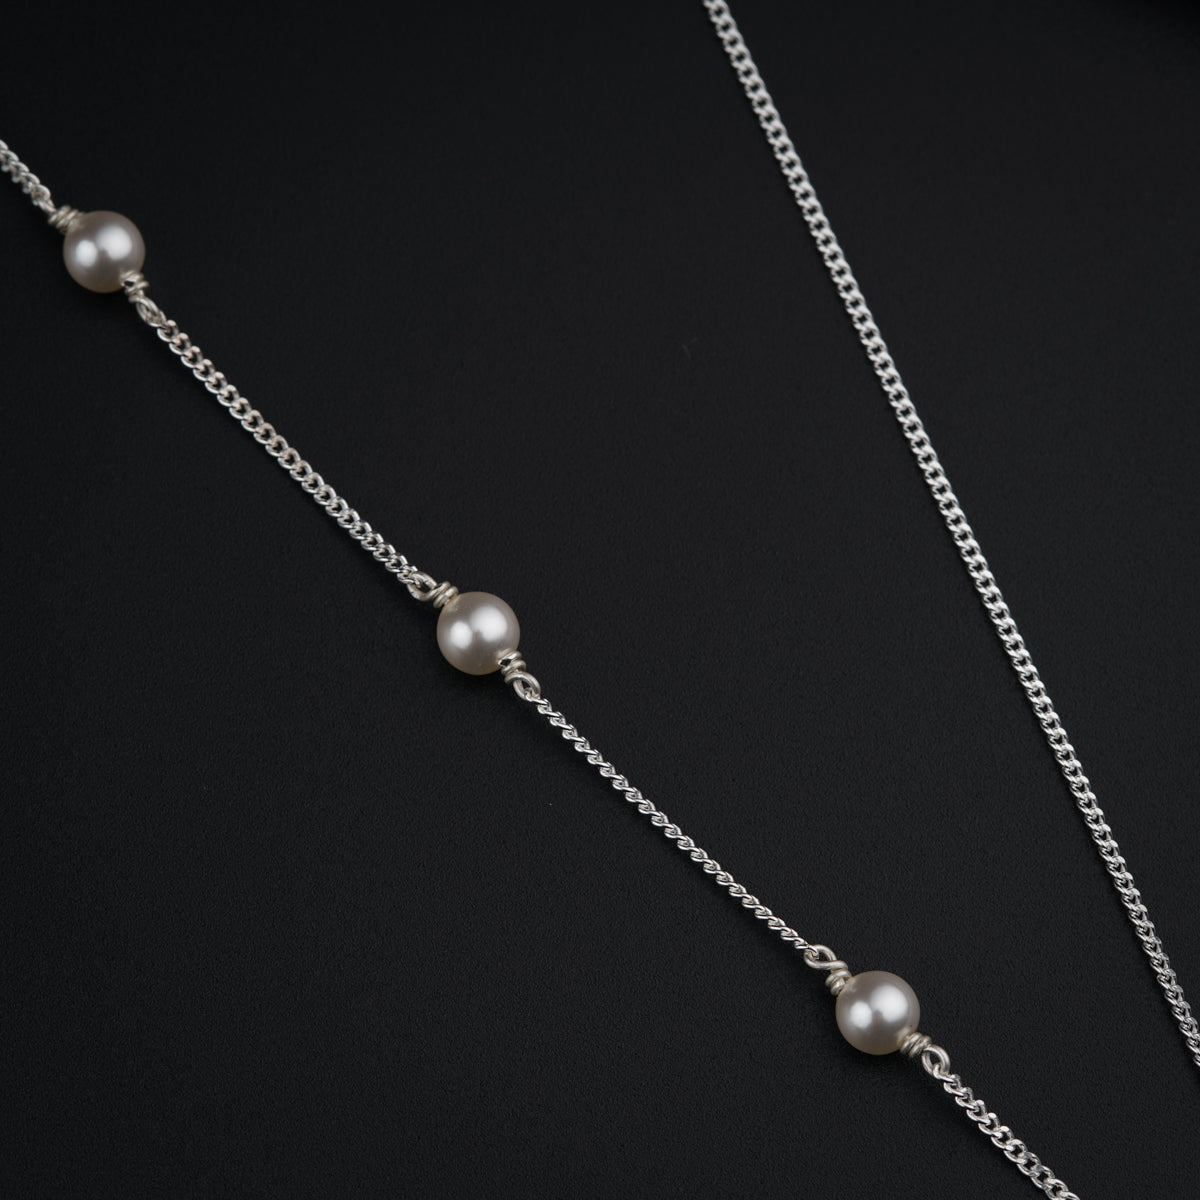 Dainty Silver Necklace With High Quality Pearls